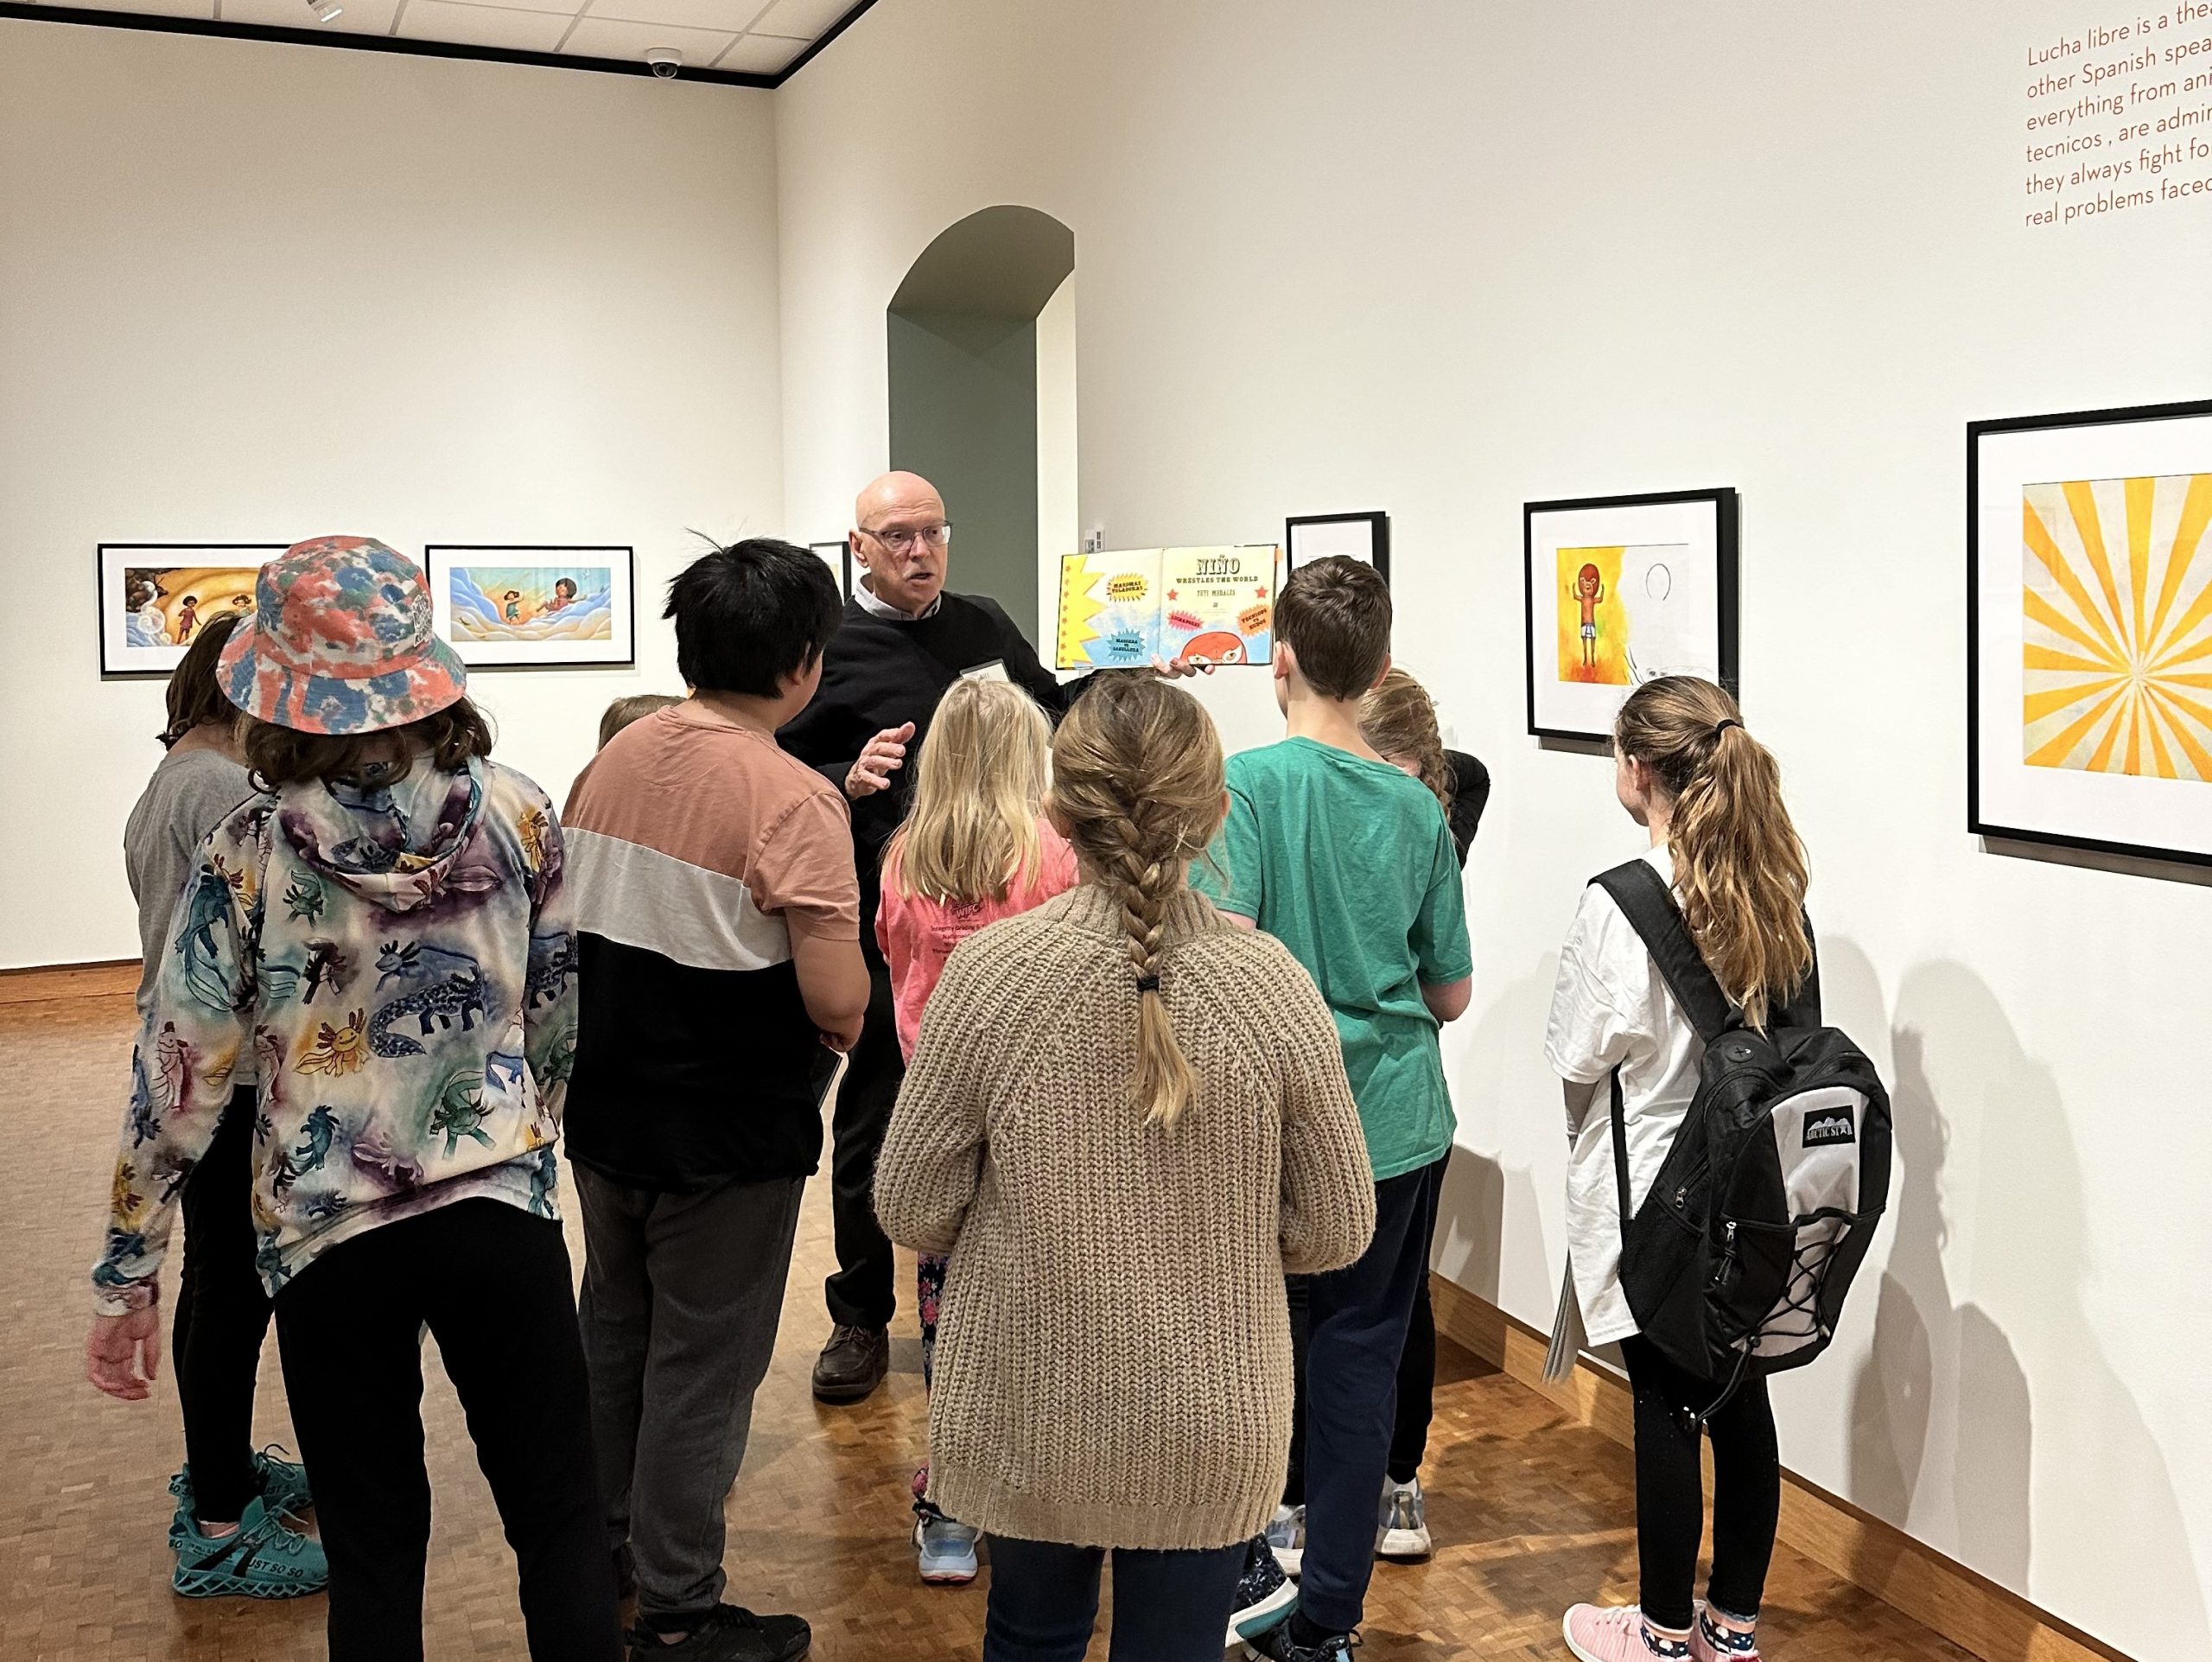 Students stand in a large gallery space with colorful mixed media illustrations. They are facing a museum docent, who is holding up a book illustrated by artist Yuyi Morales